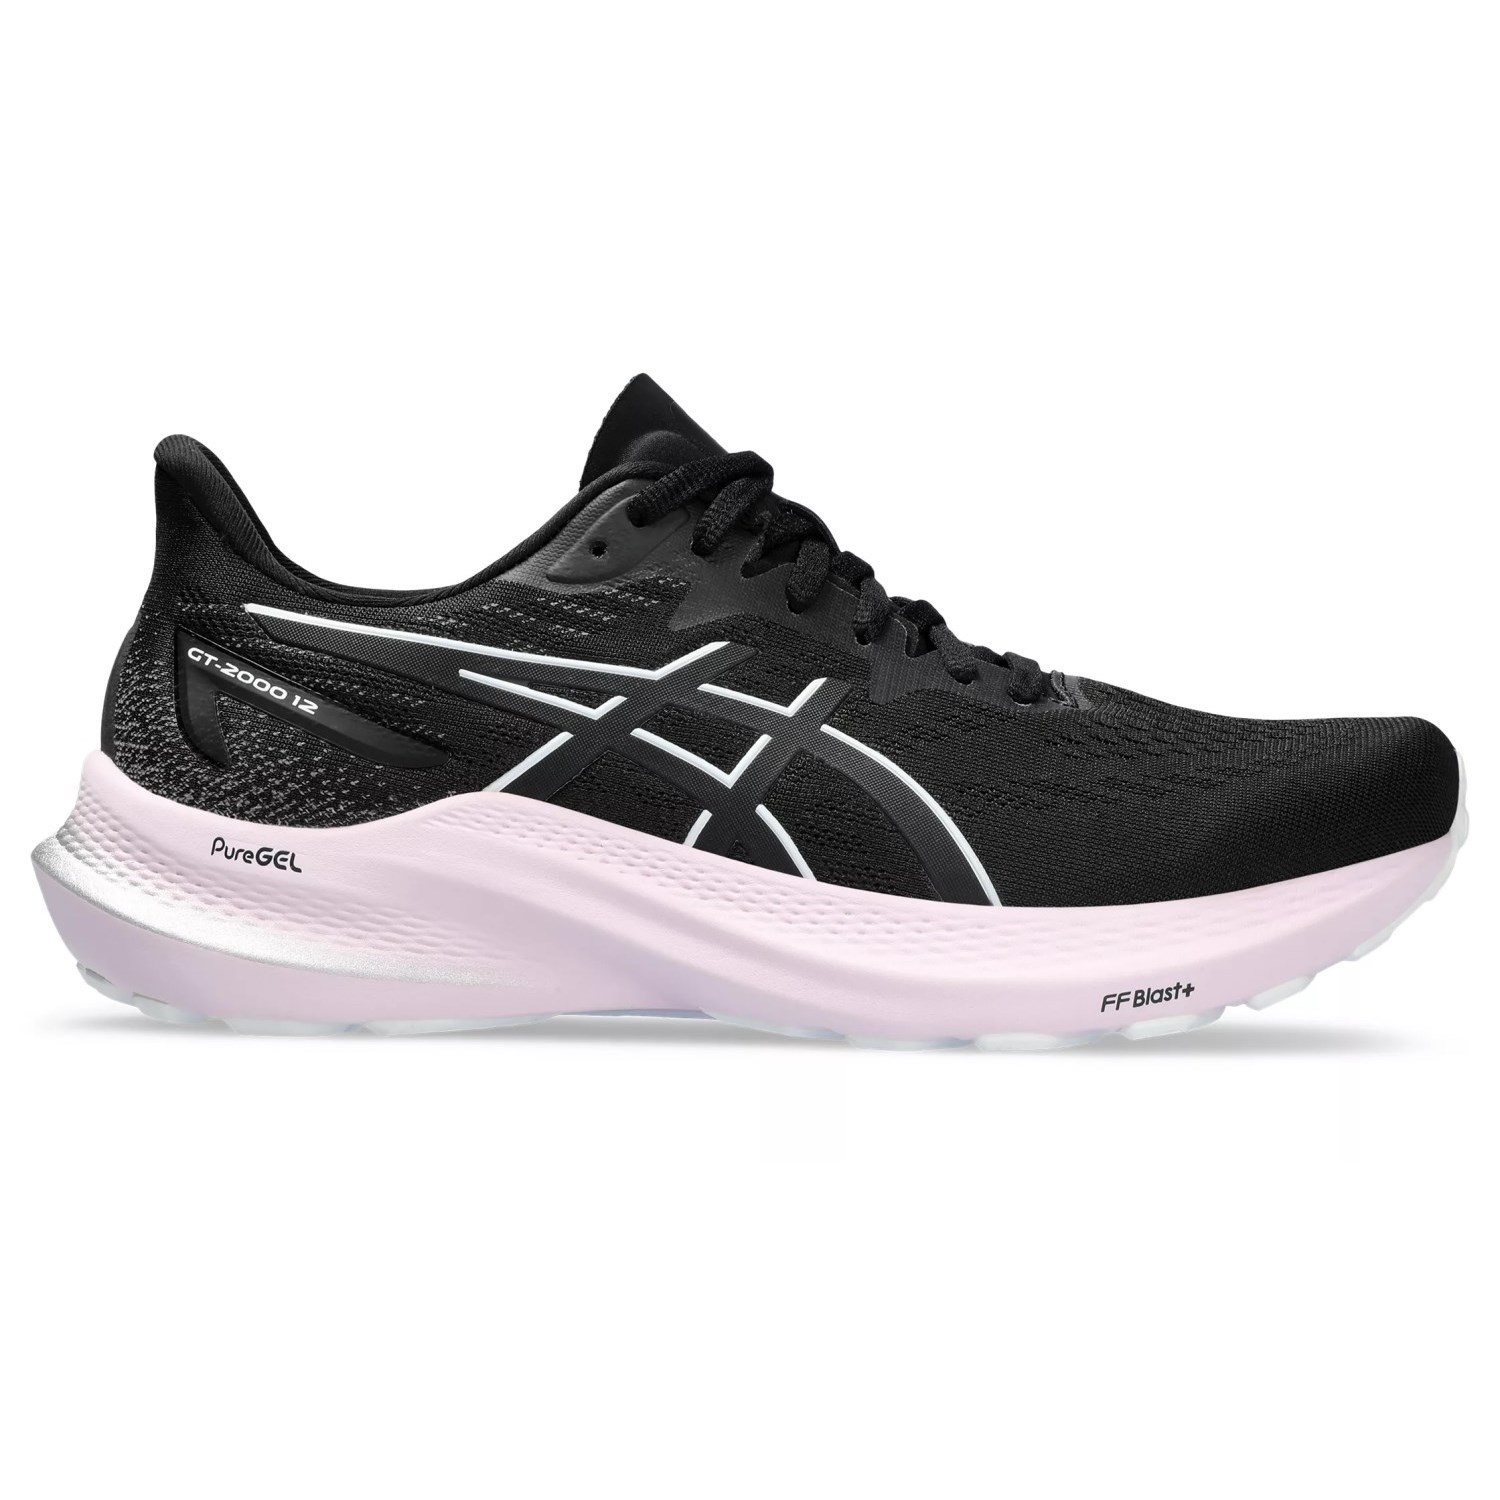 Asics GT-2000 12 - Womens Running Shoes - Black/White/Pale Pink ...